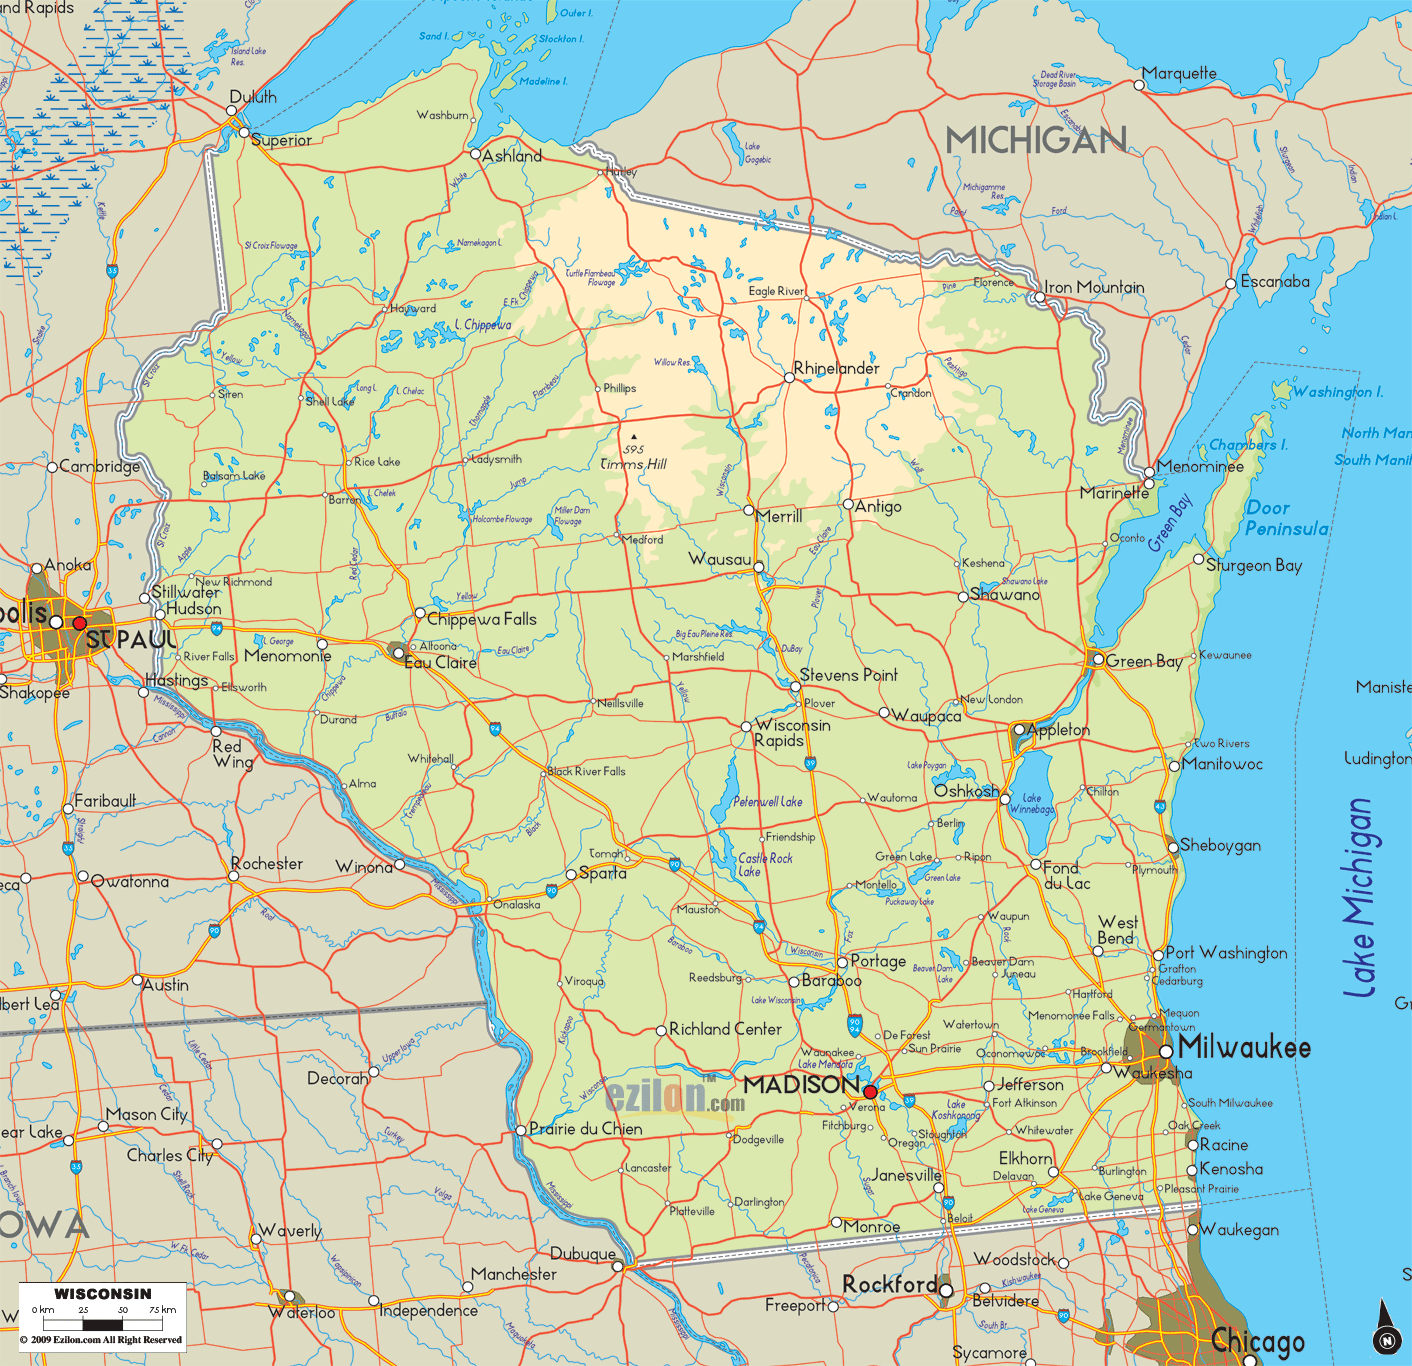 The physical map of Wisconsin State, USA showing major geographical features such as rivers, lakes, topography and land formations.